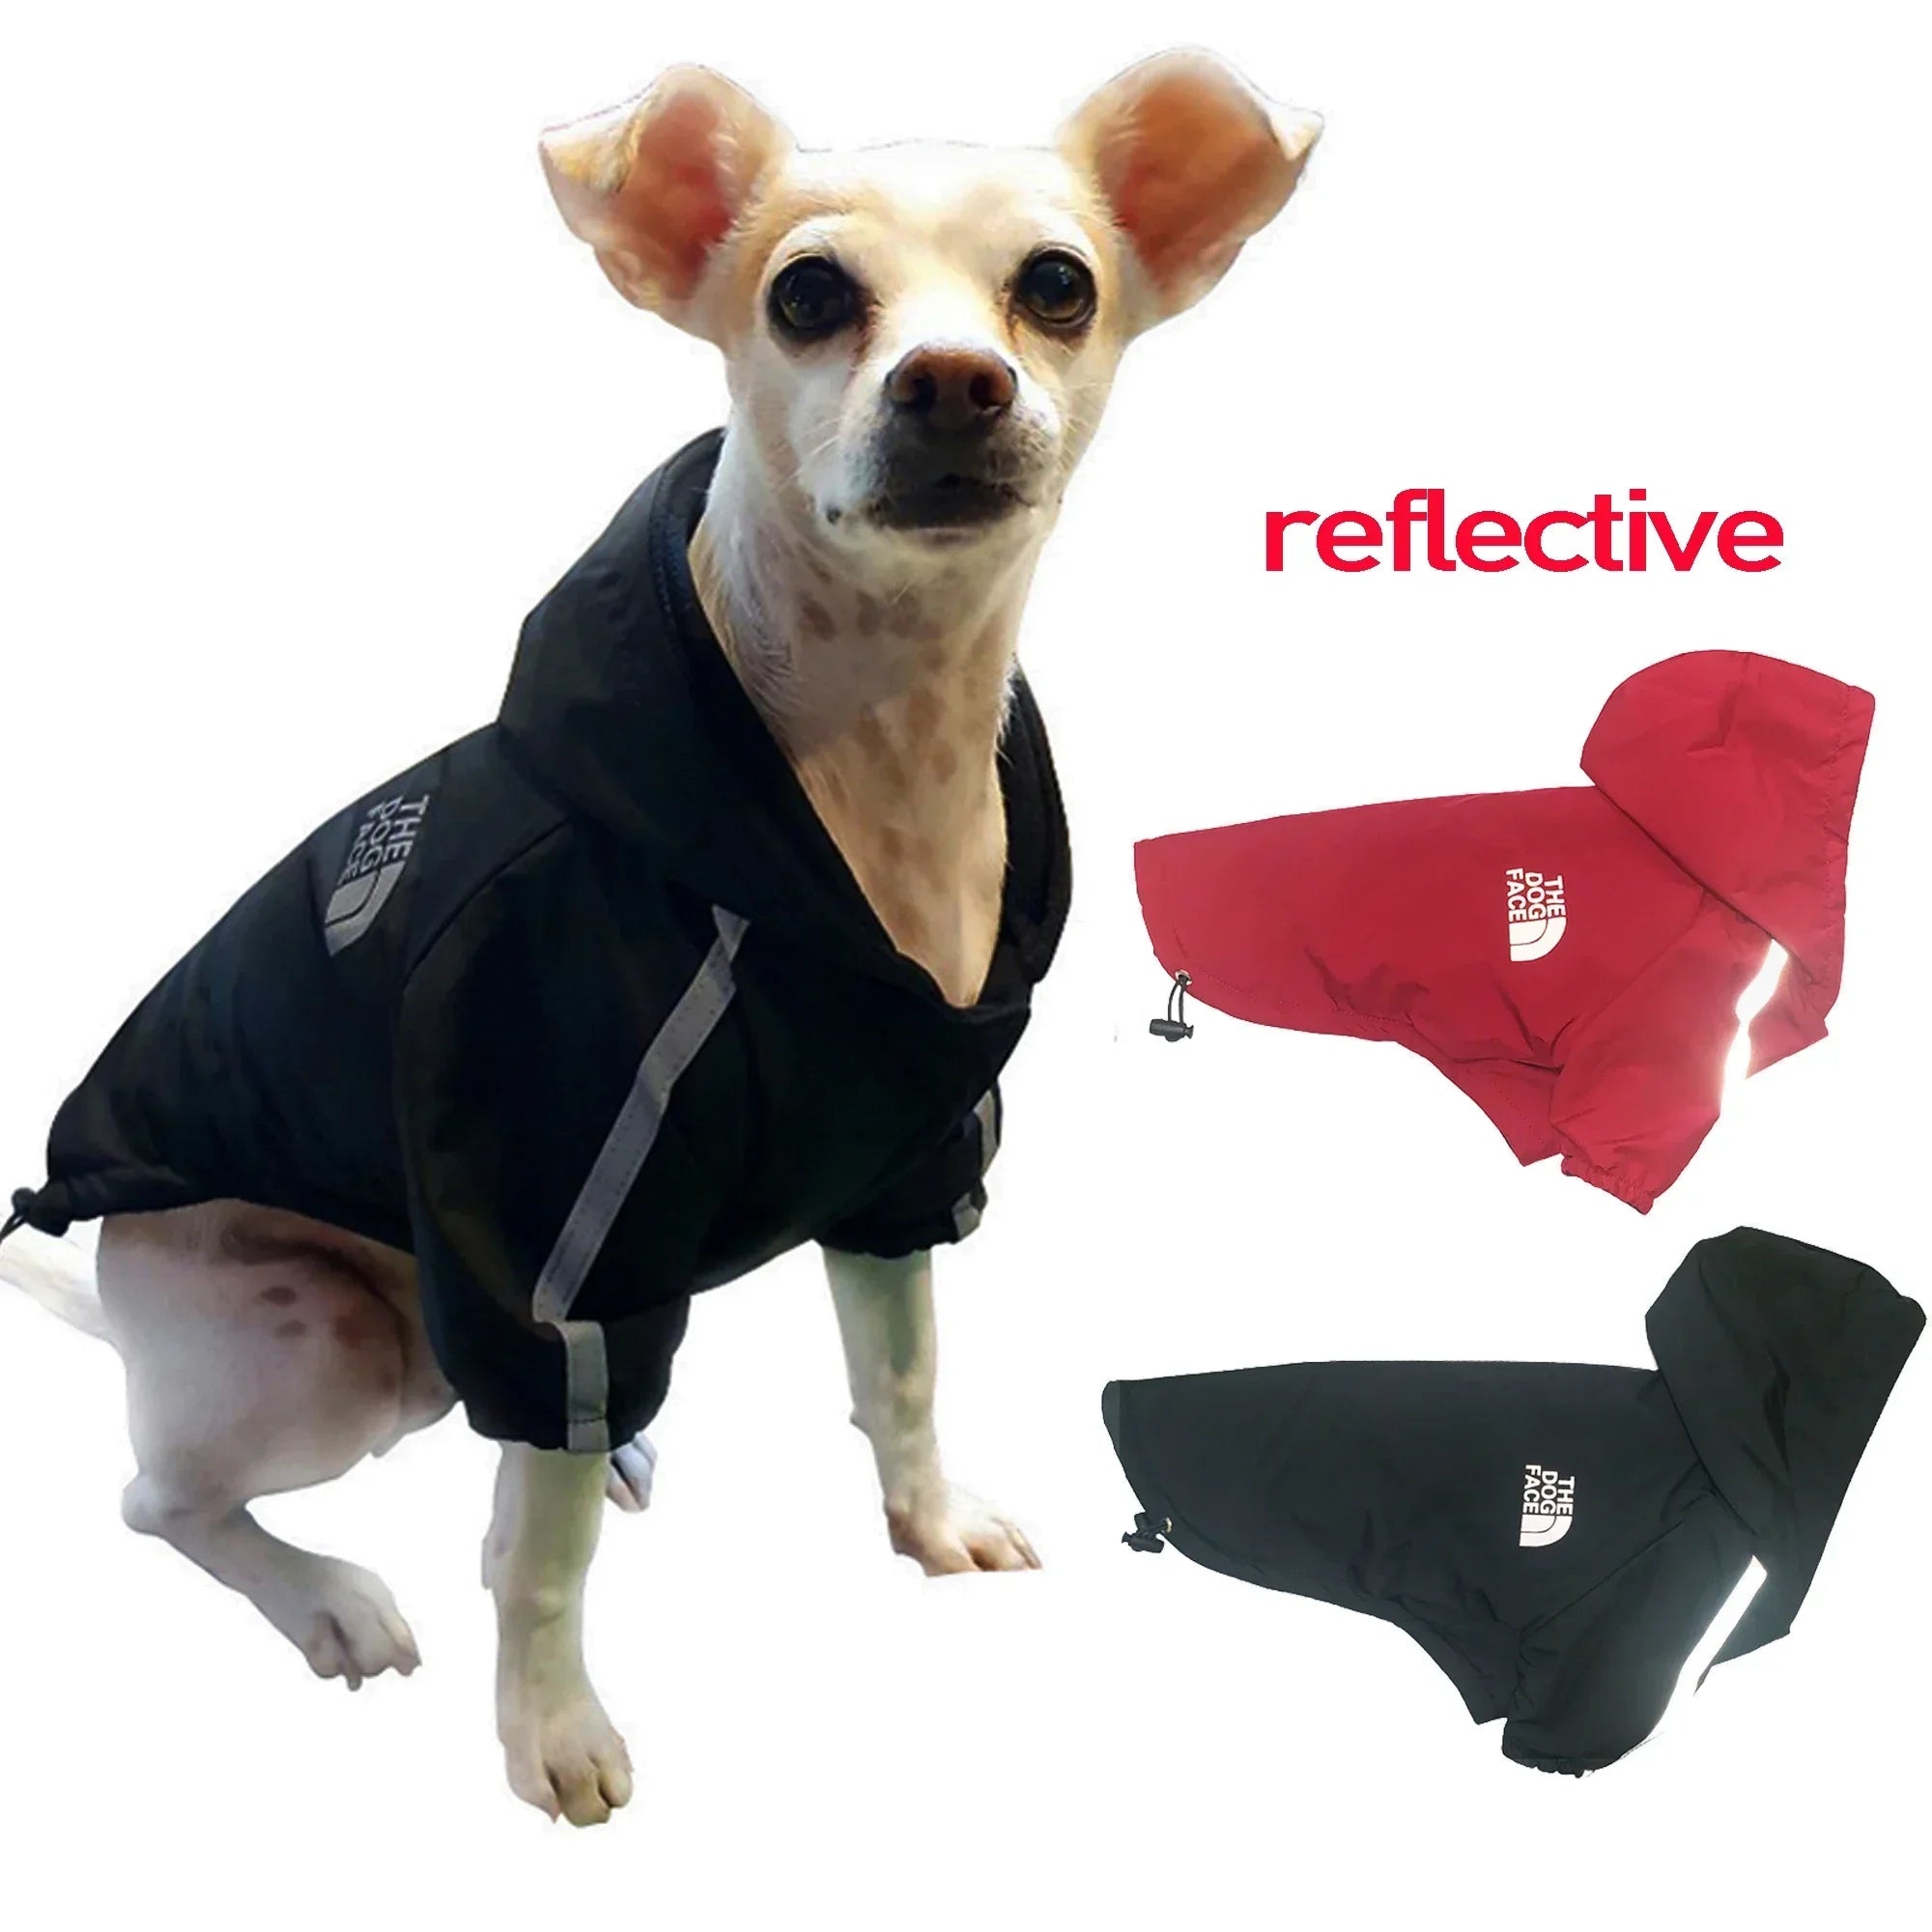 Reflective Waterproof Dog Hooded Jacket for Small Breeds  petlums.com   